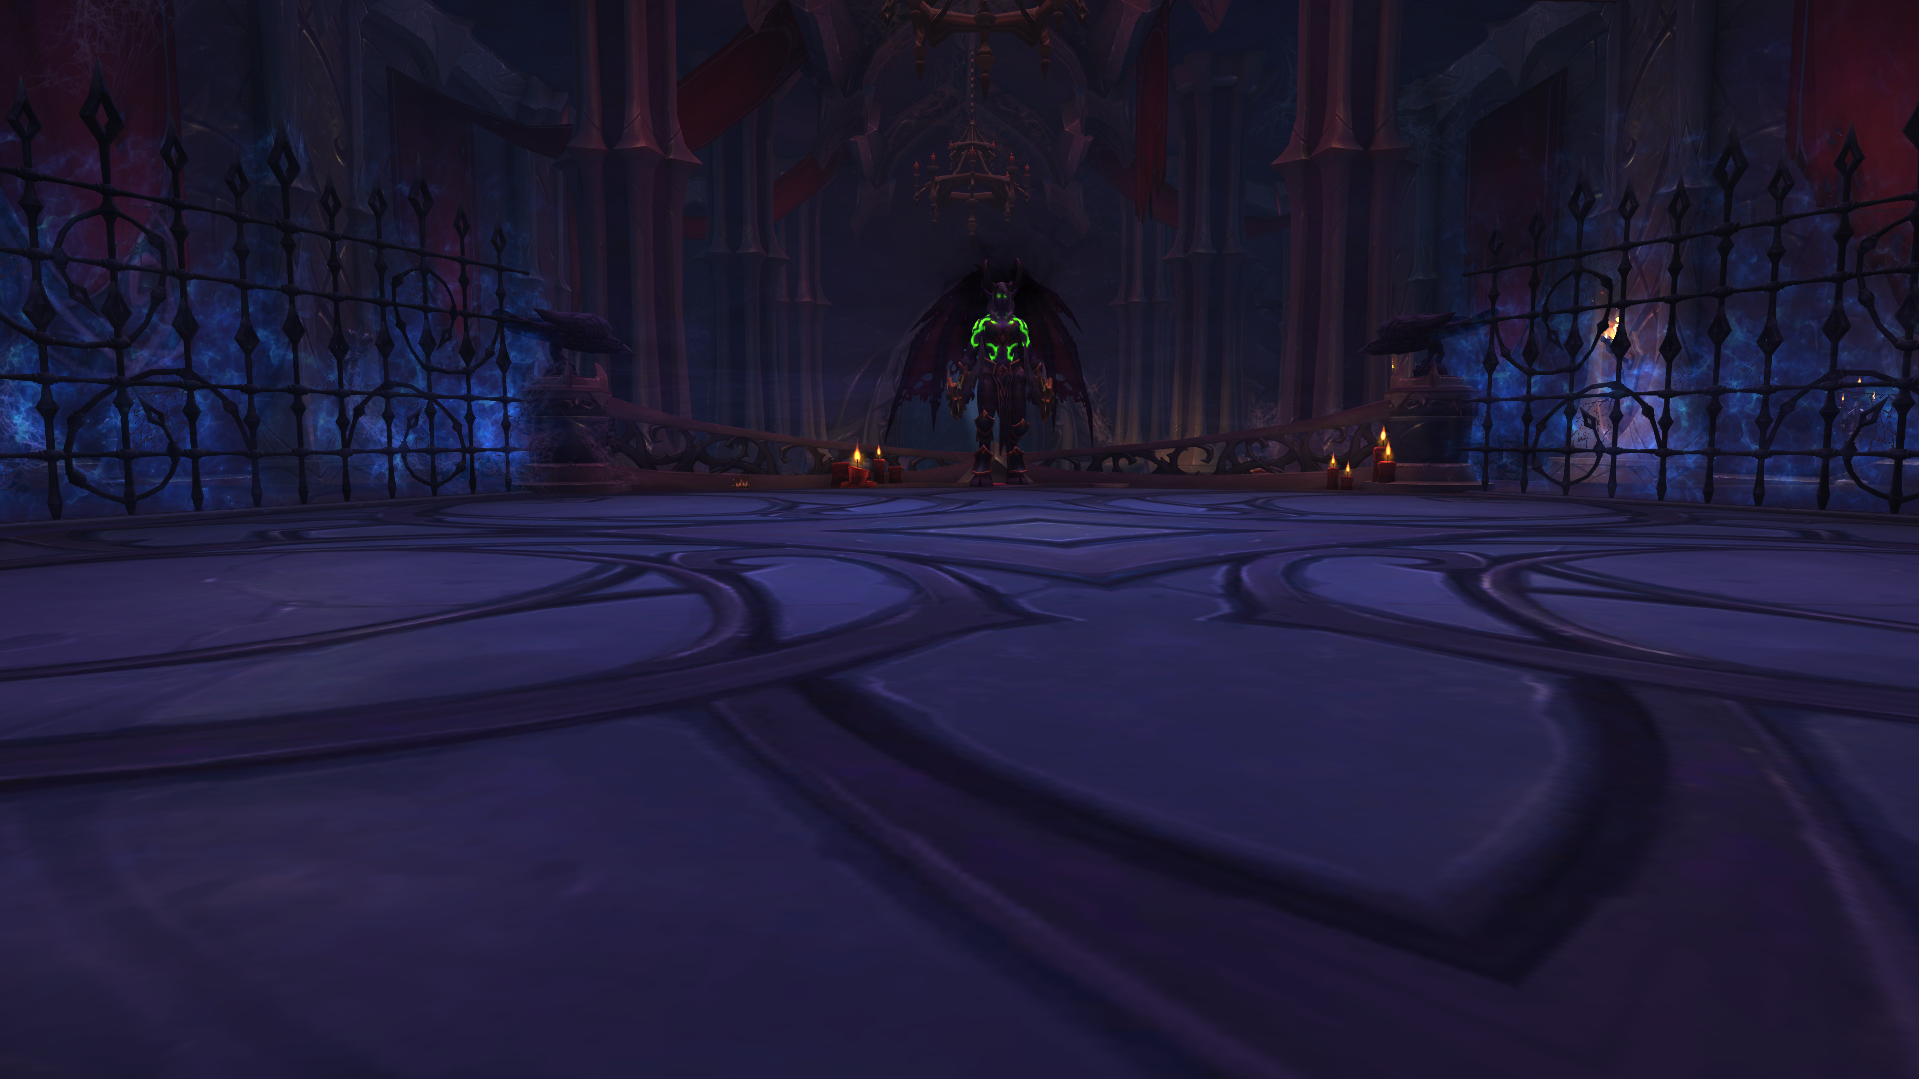 Pvp Strategies For Mythic+ Dungeons In Wow: Tactics For Victory